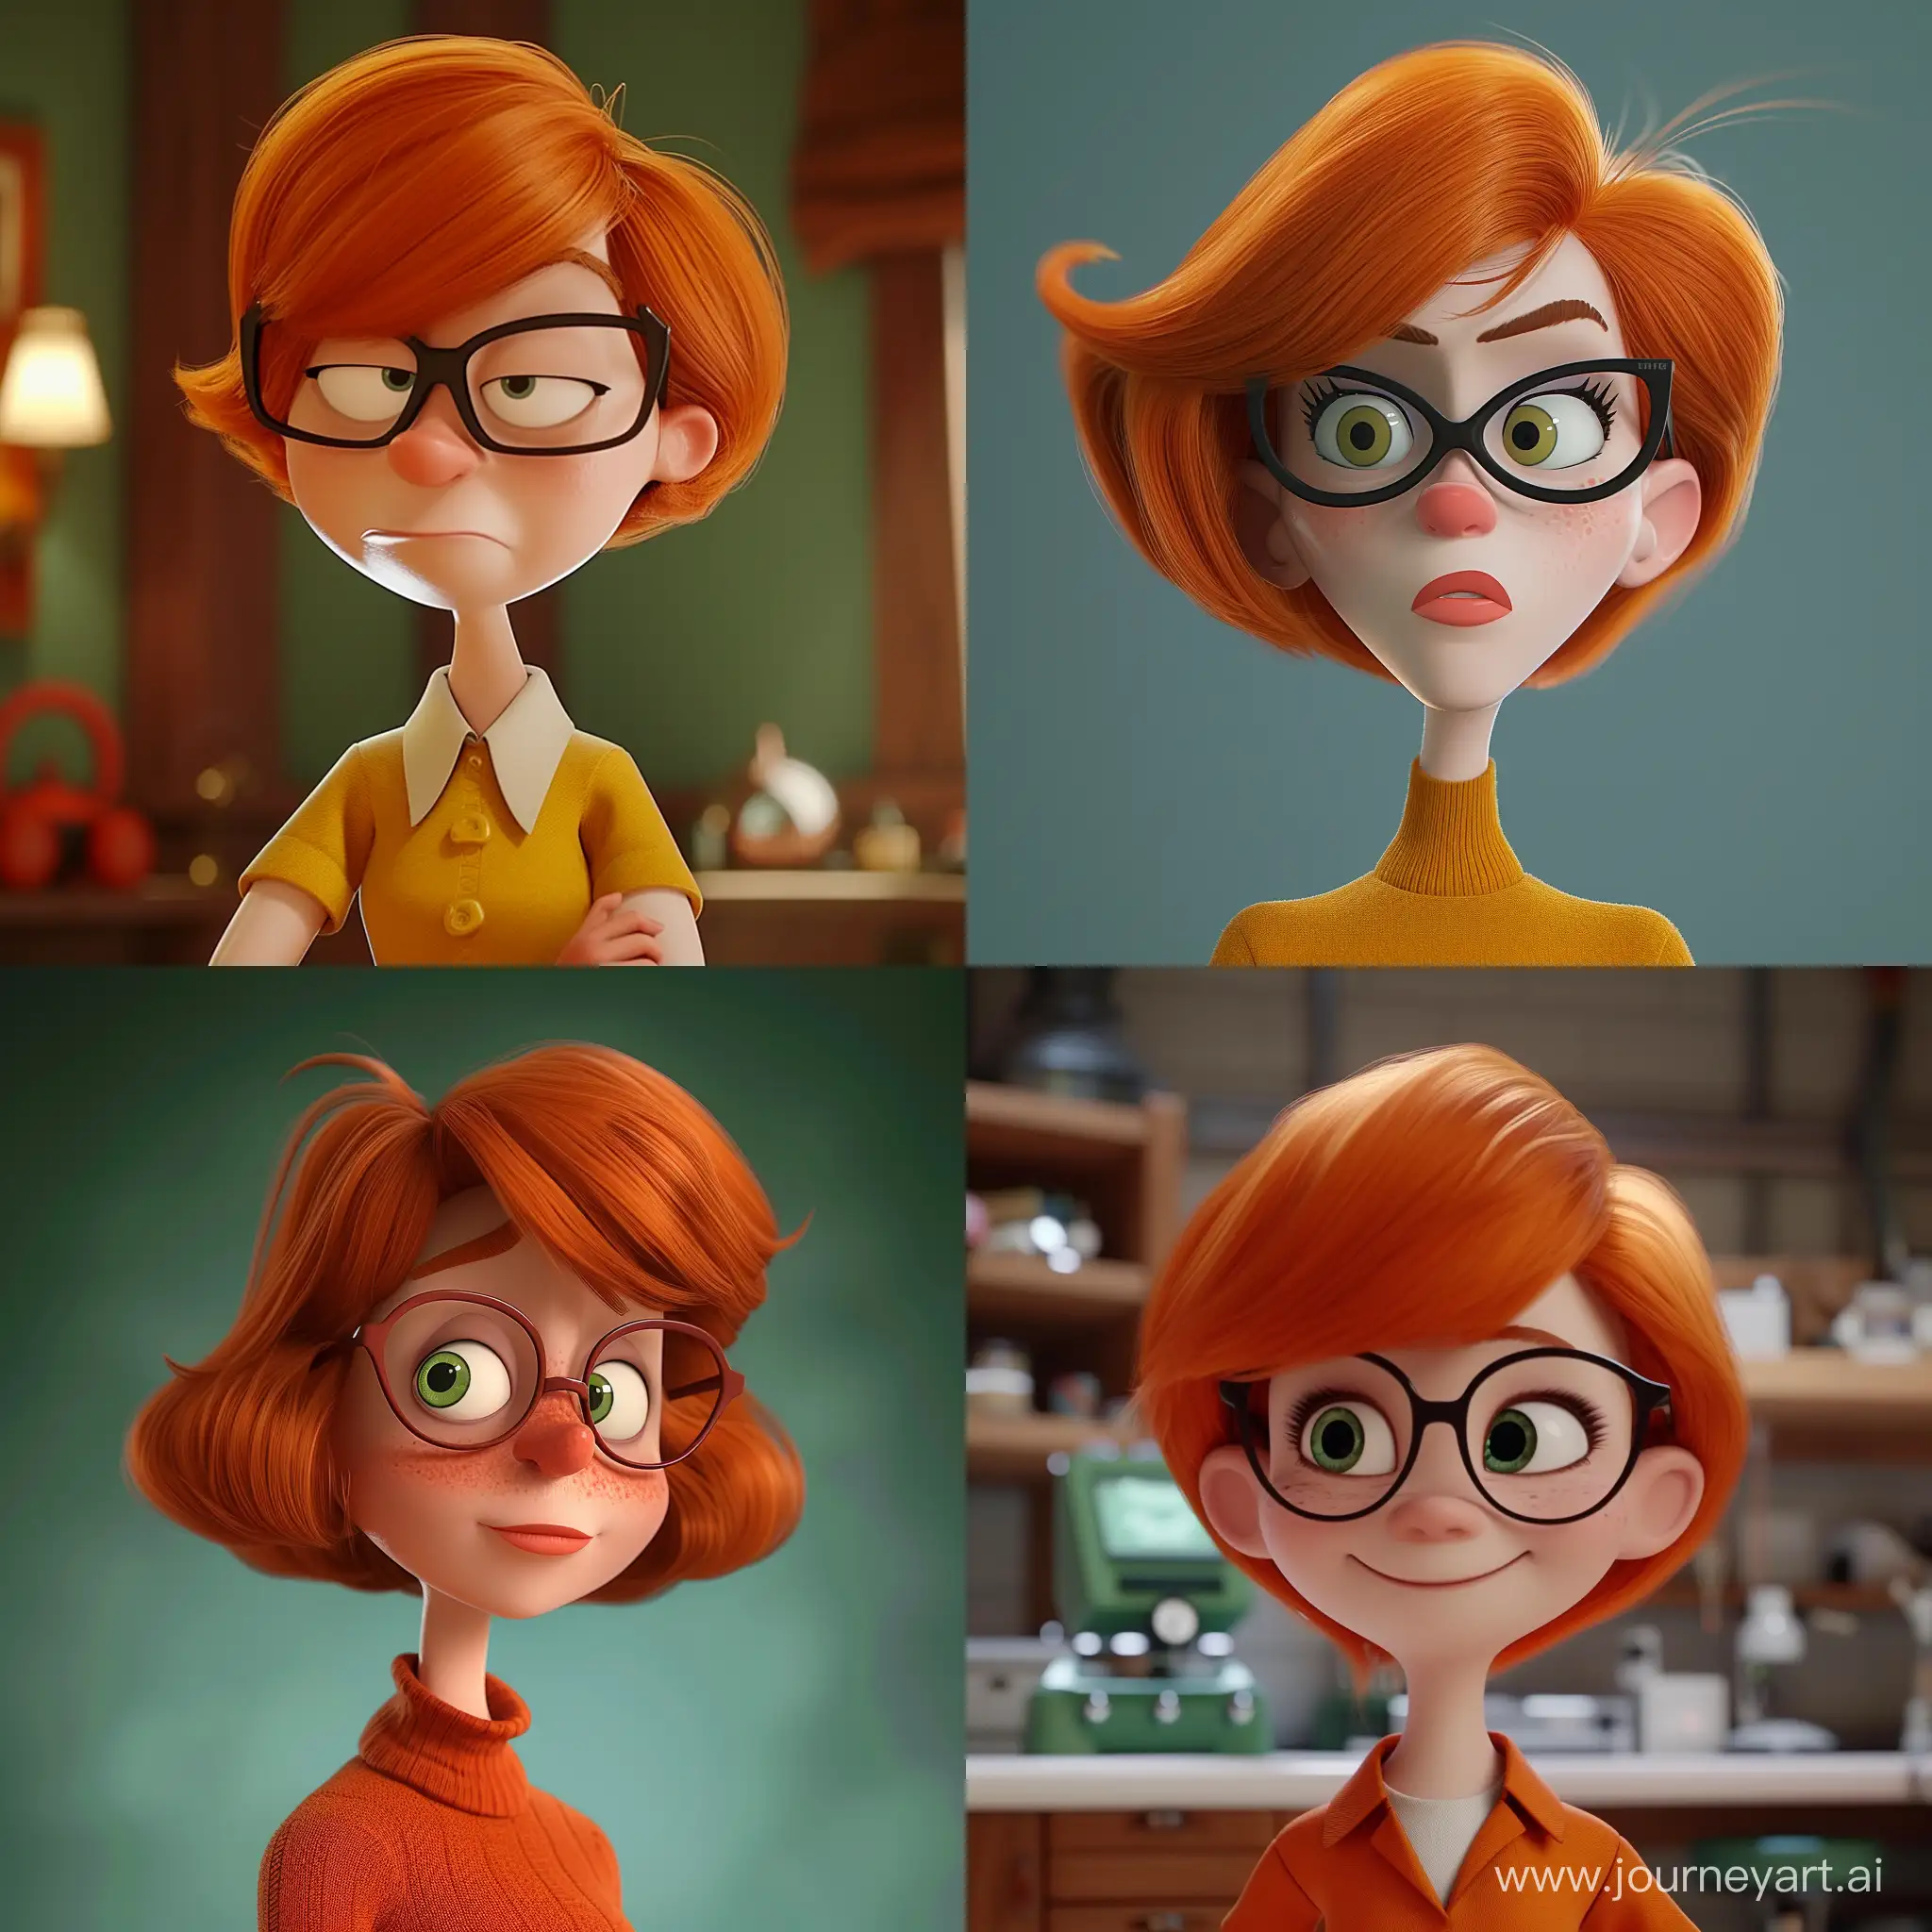 Dexter mom from the cartoon dexter laboratory in reality